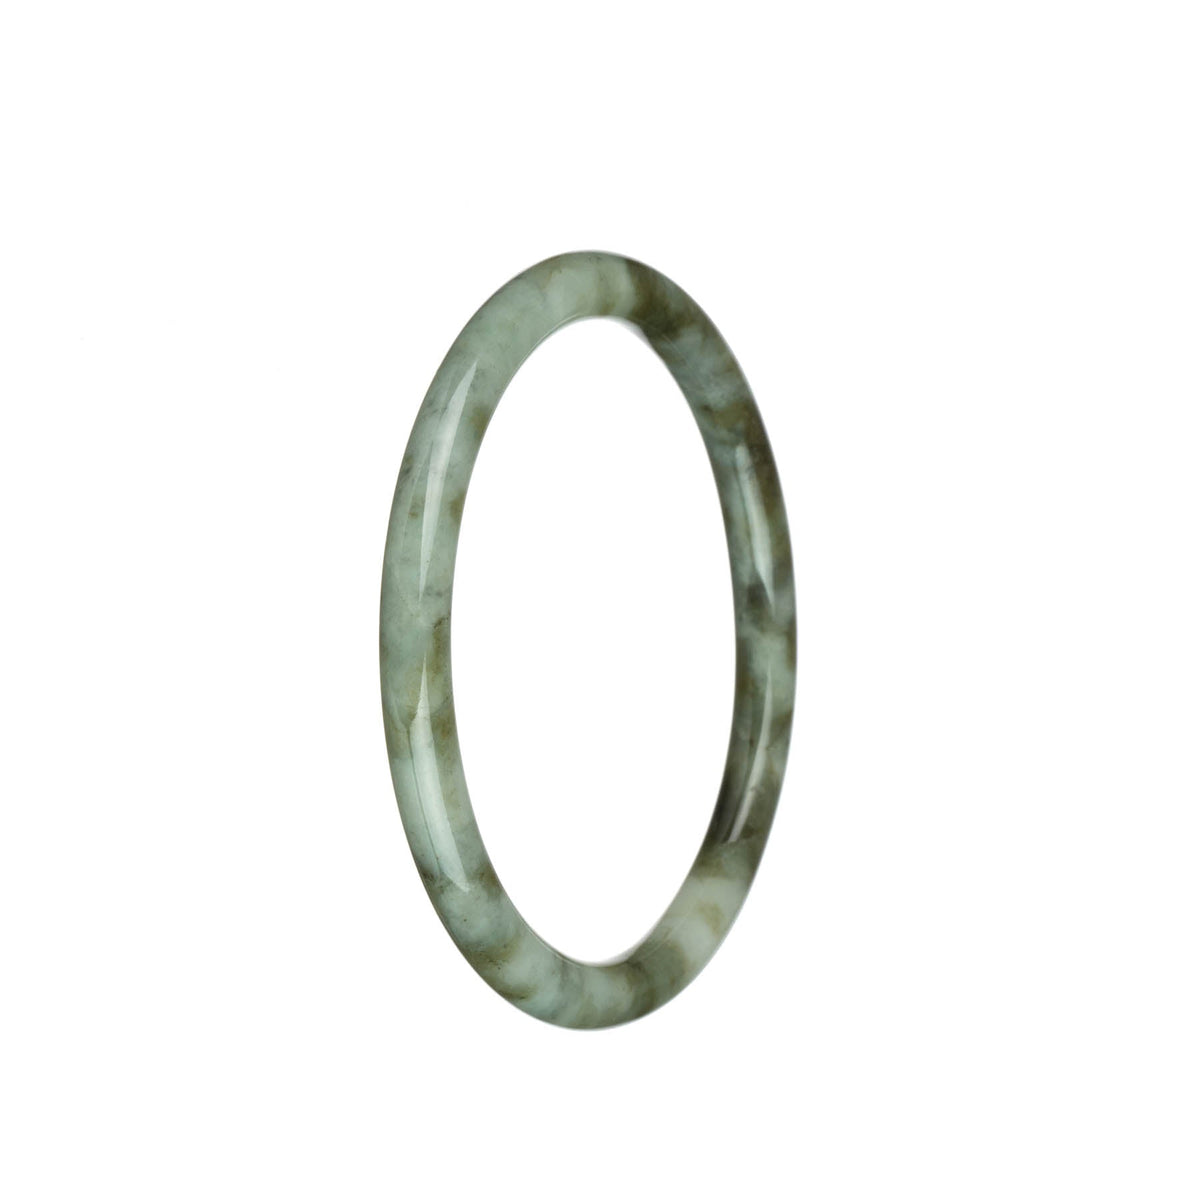 A petite round Burma Jade bracelet featuring natural white color with olive green patterns. Certified as a genuine and authentic piece. Designed by MAYS.